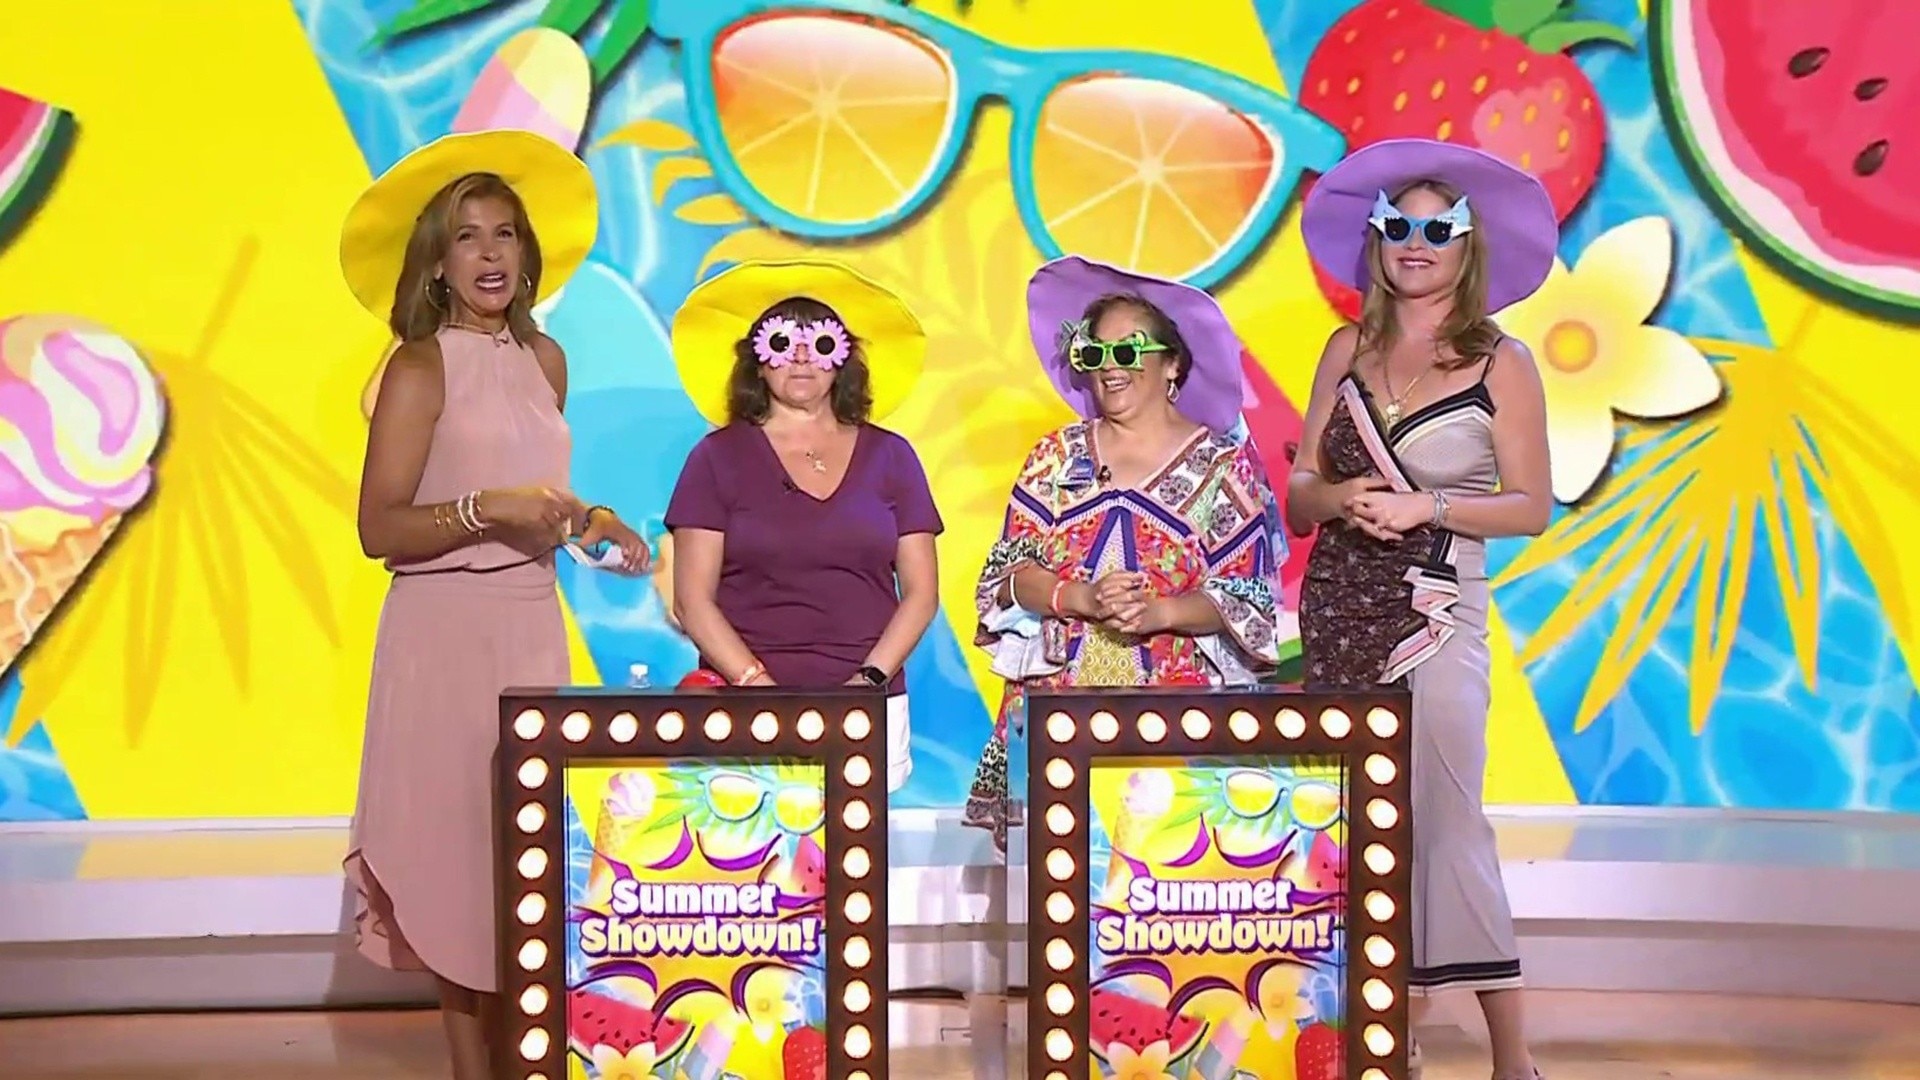 Watch TODAY Excerpt Hoda and Jenna play Summer Showdown with 2 plaza